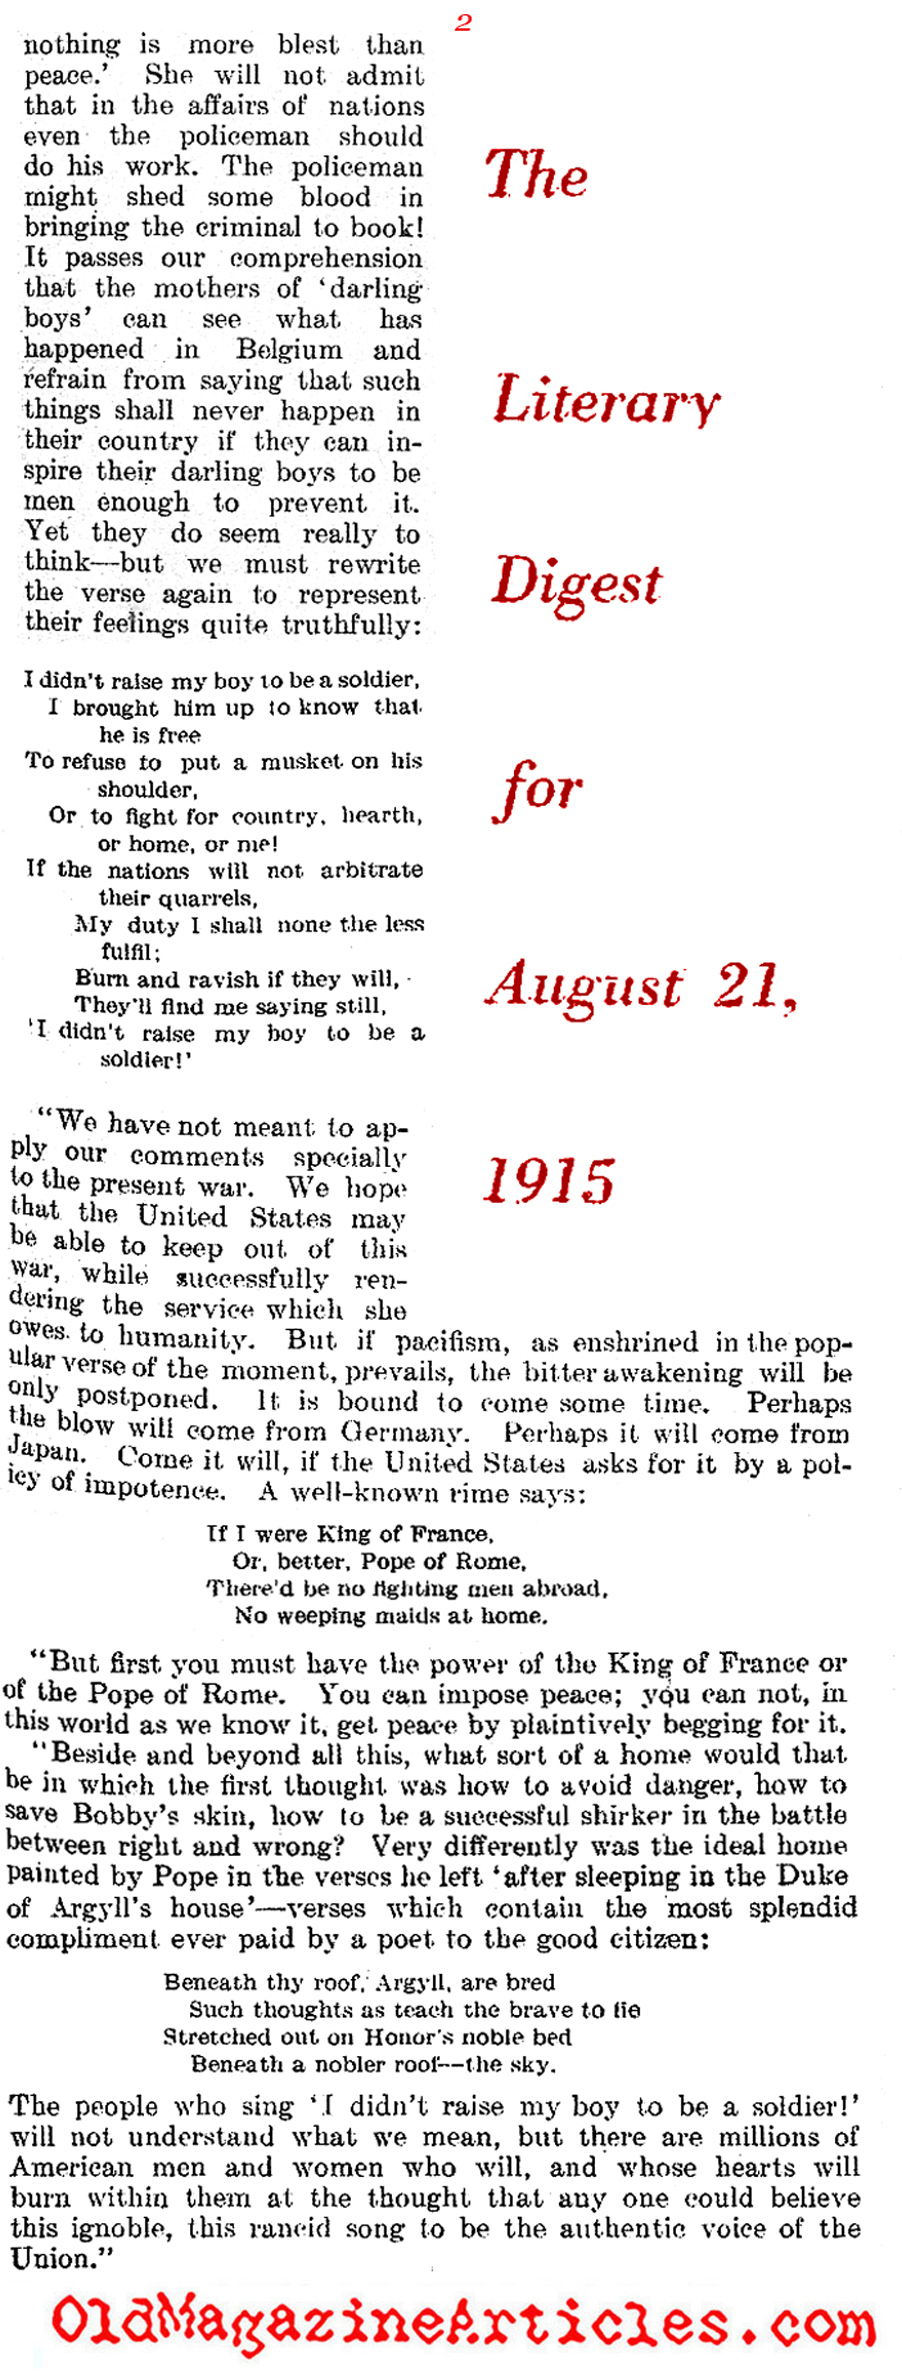 The British Rage Against Pacifism (The Literary Digest, 1915)